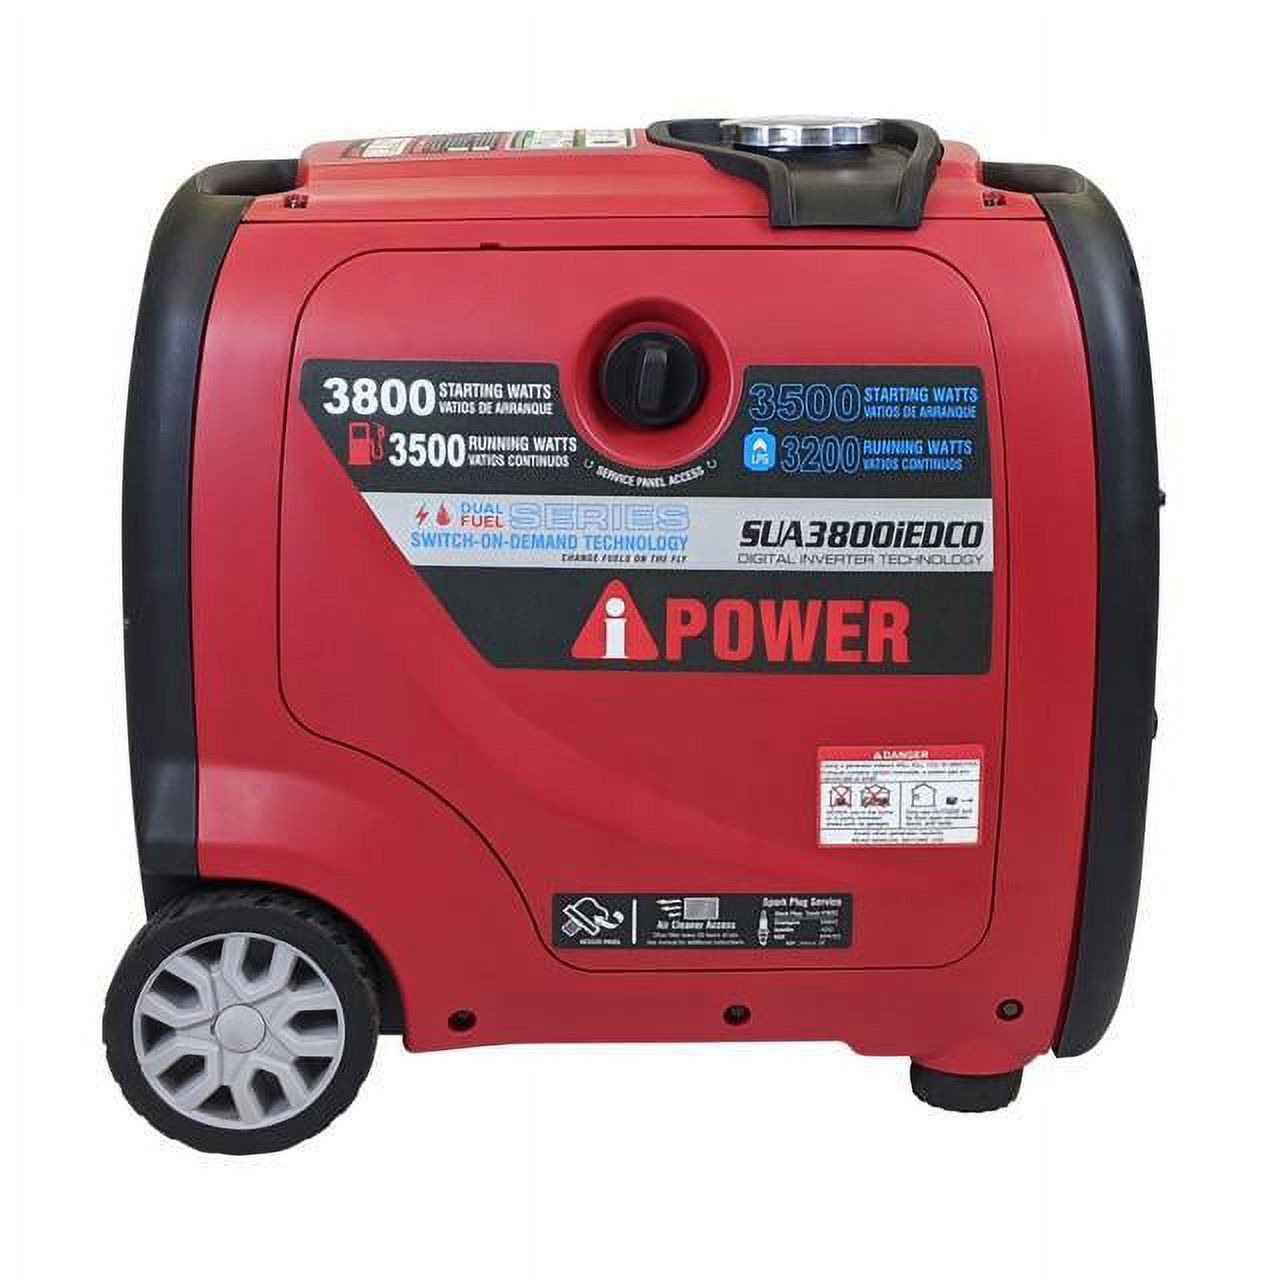 A-IPOWER Dual Fuel Generator SUA3800iED - image 3 of 7